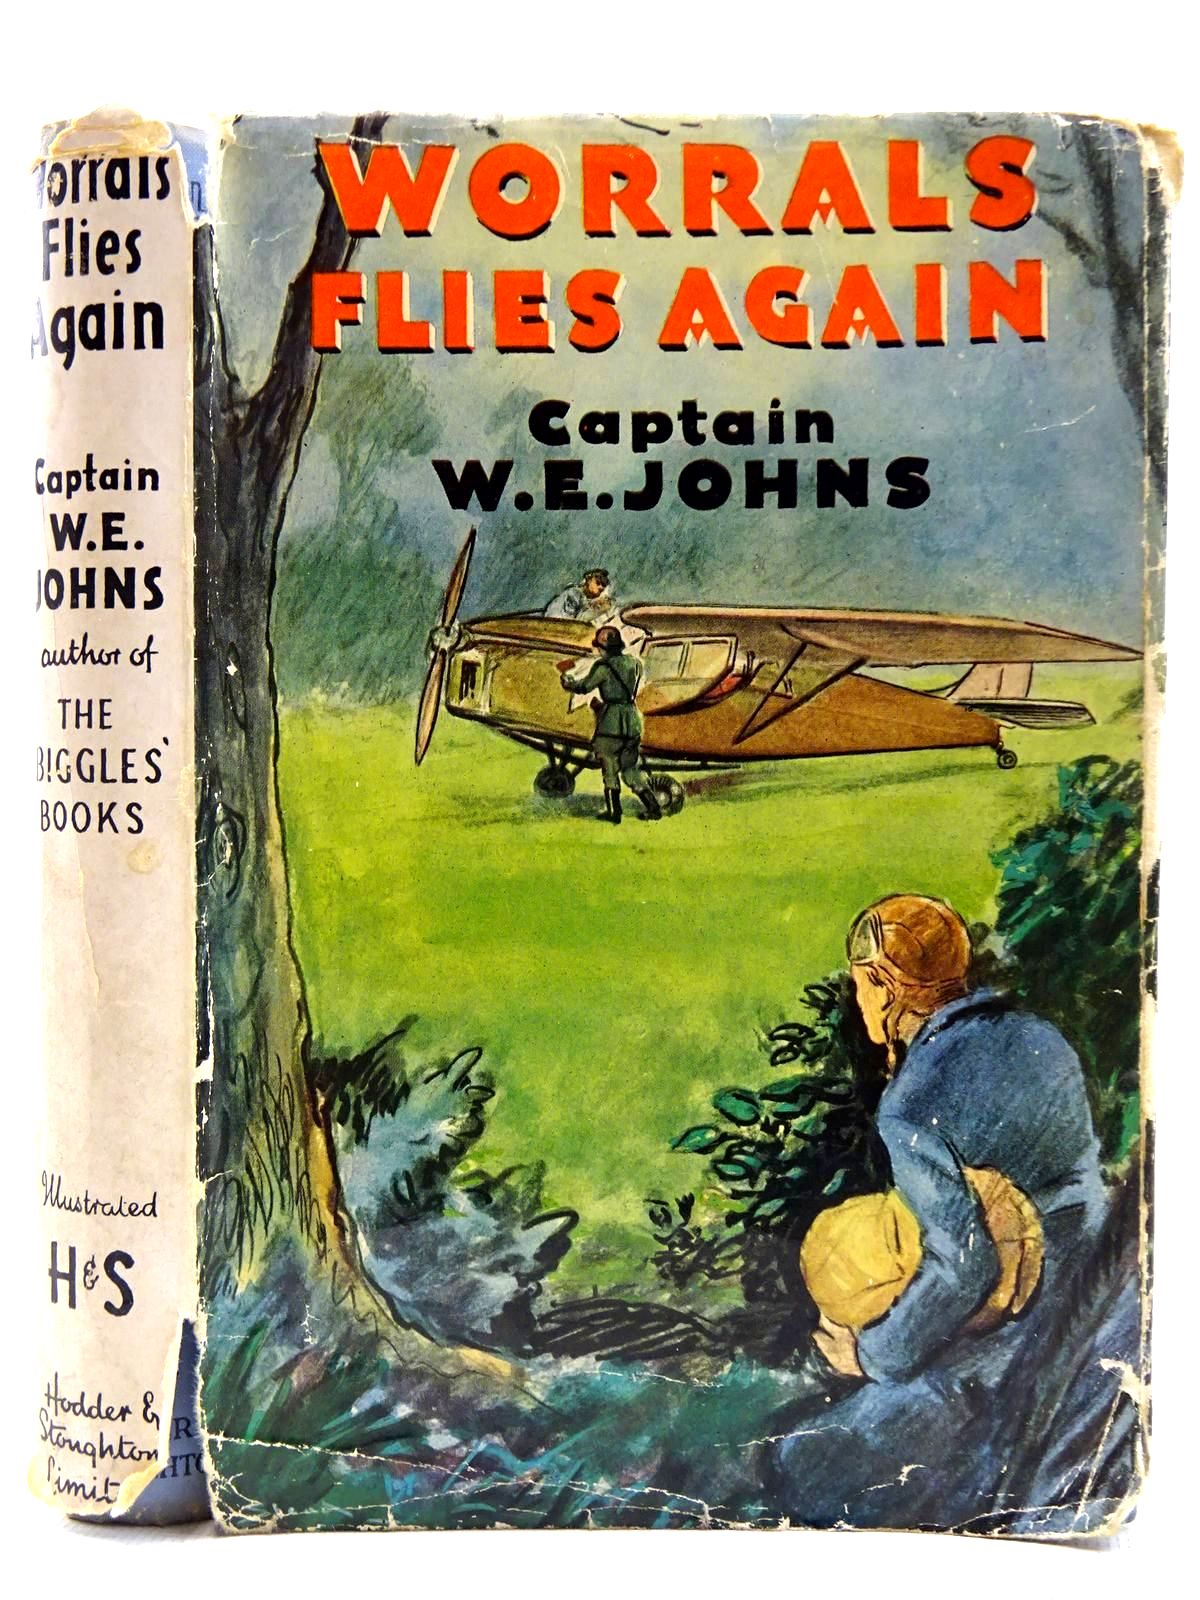 Cover of WORRALS FLIES AGAIN by W.E. Johns